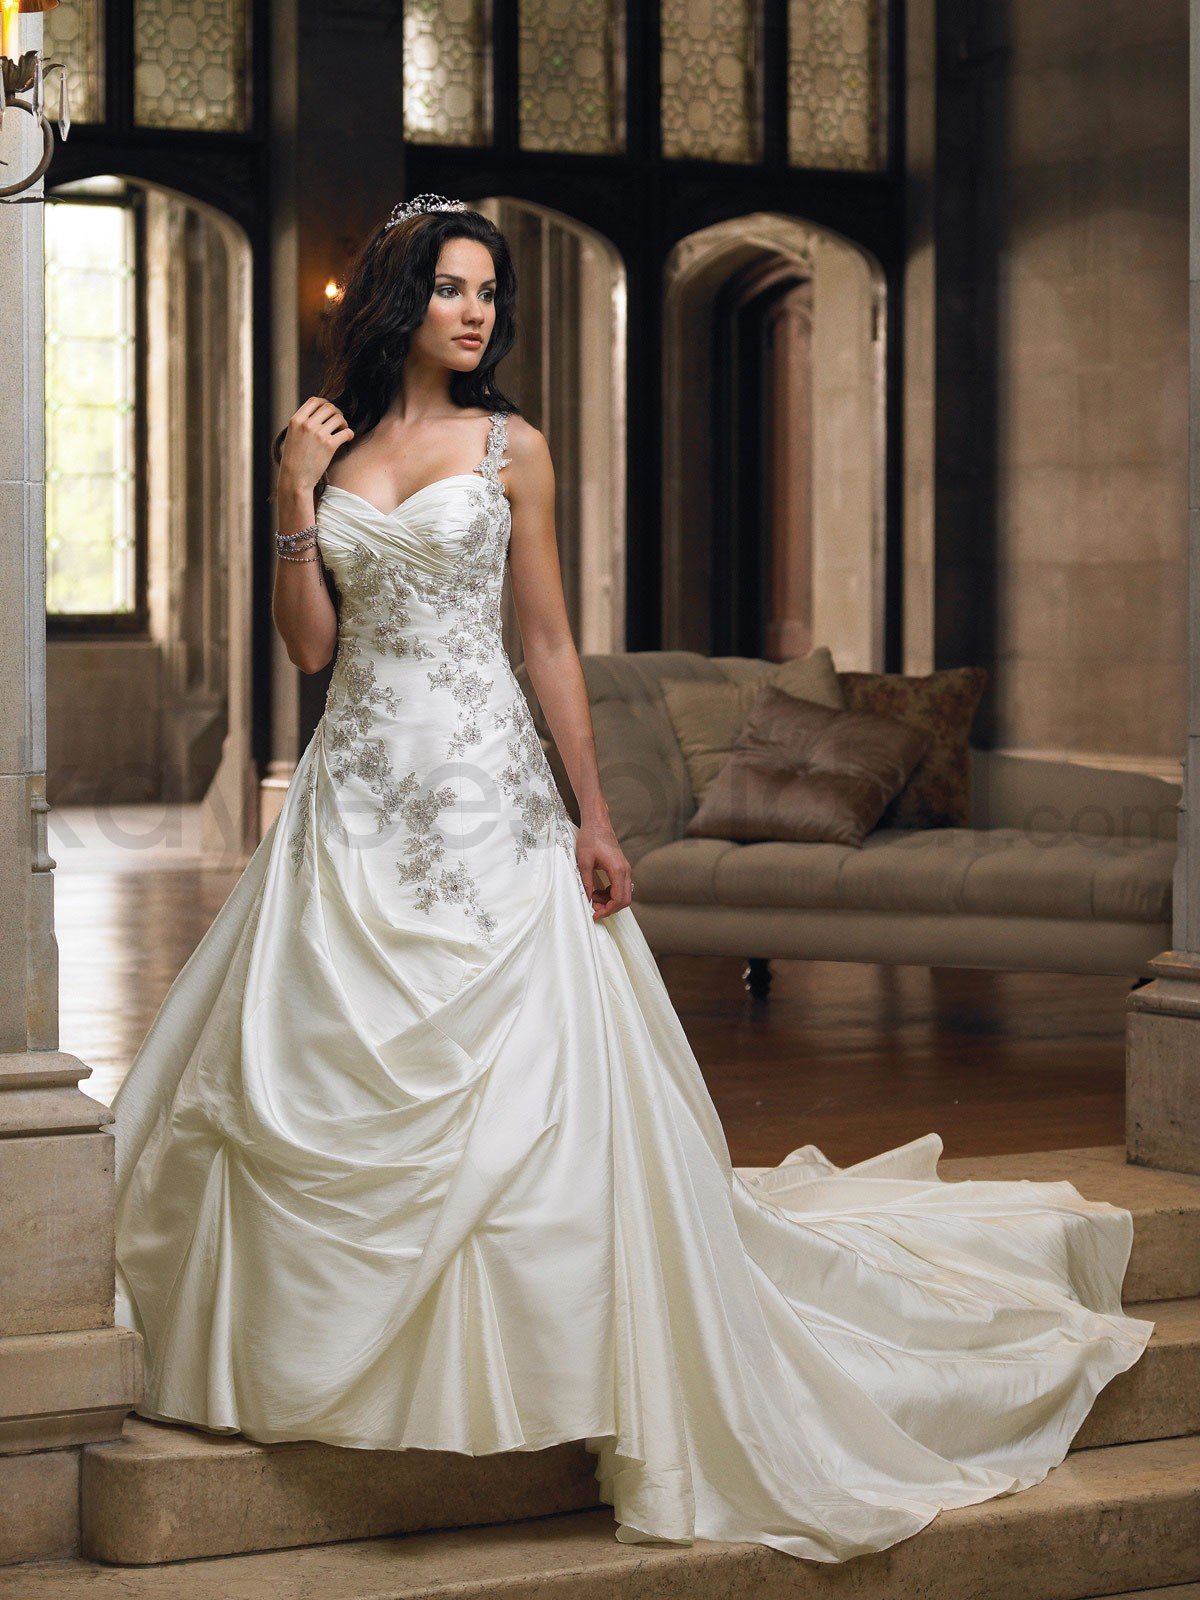 The Irresistible Attraction Of Ball Gown Wedding Dresses 9687